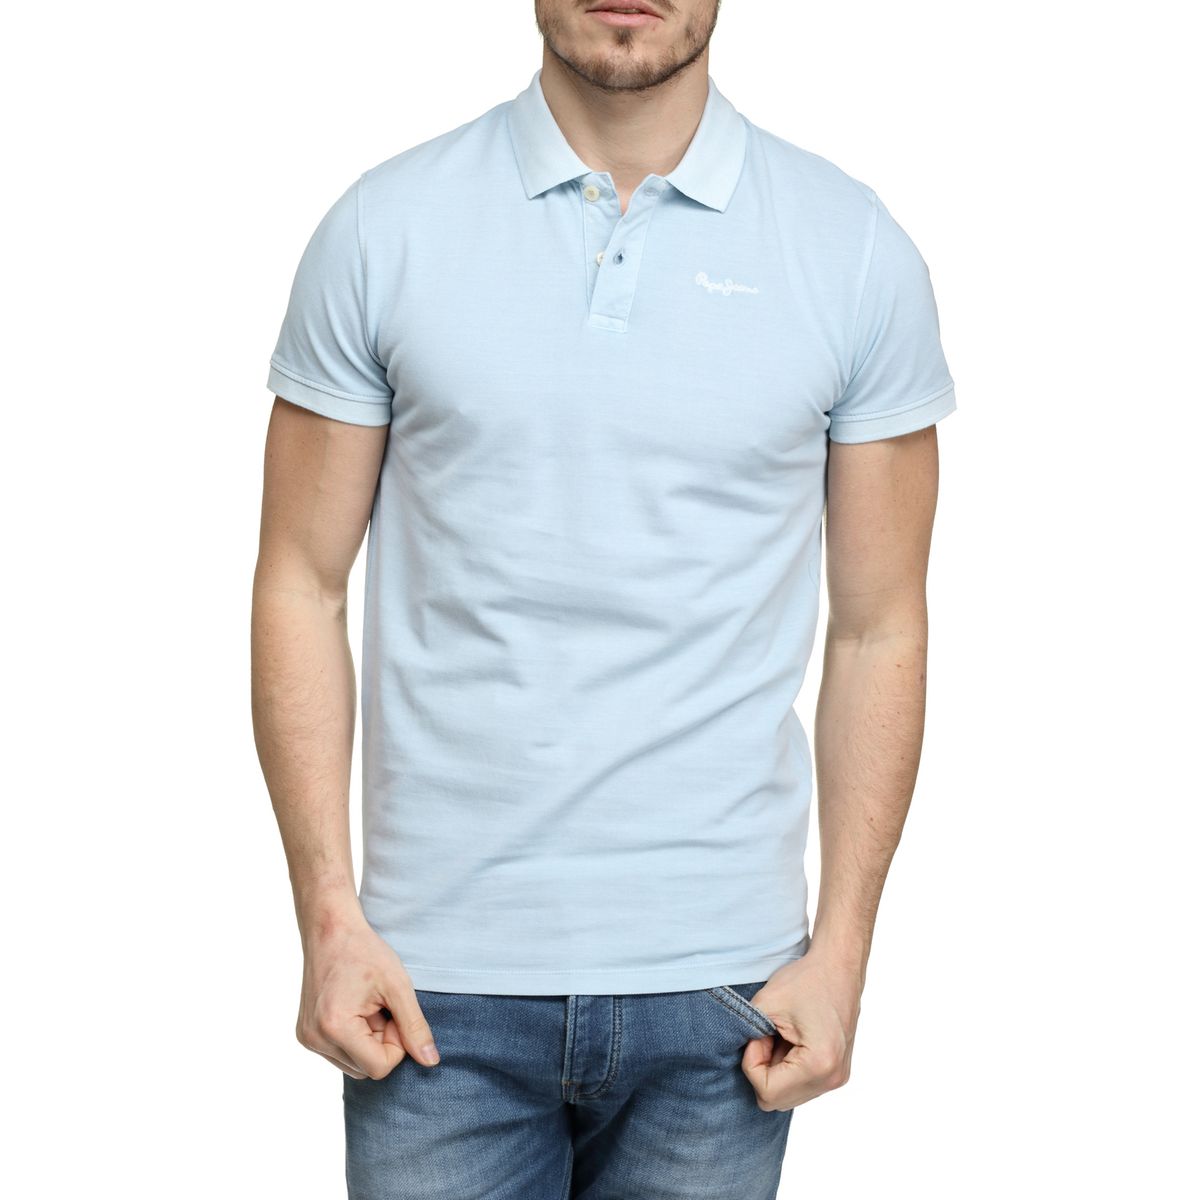 Polos Pepe Jeans Homme M rouge Polo PEPE JEANS 2 Homme Vêtements Pepe Jeans Homme Tee-shirts & Polos Pepe Jeans Homme Polos Pepe Jeans Homme 